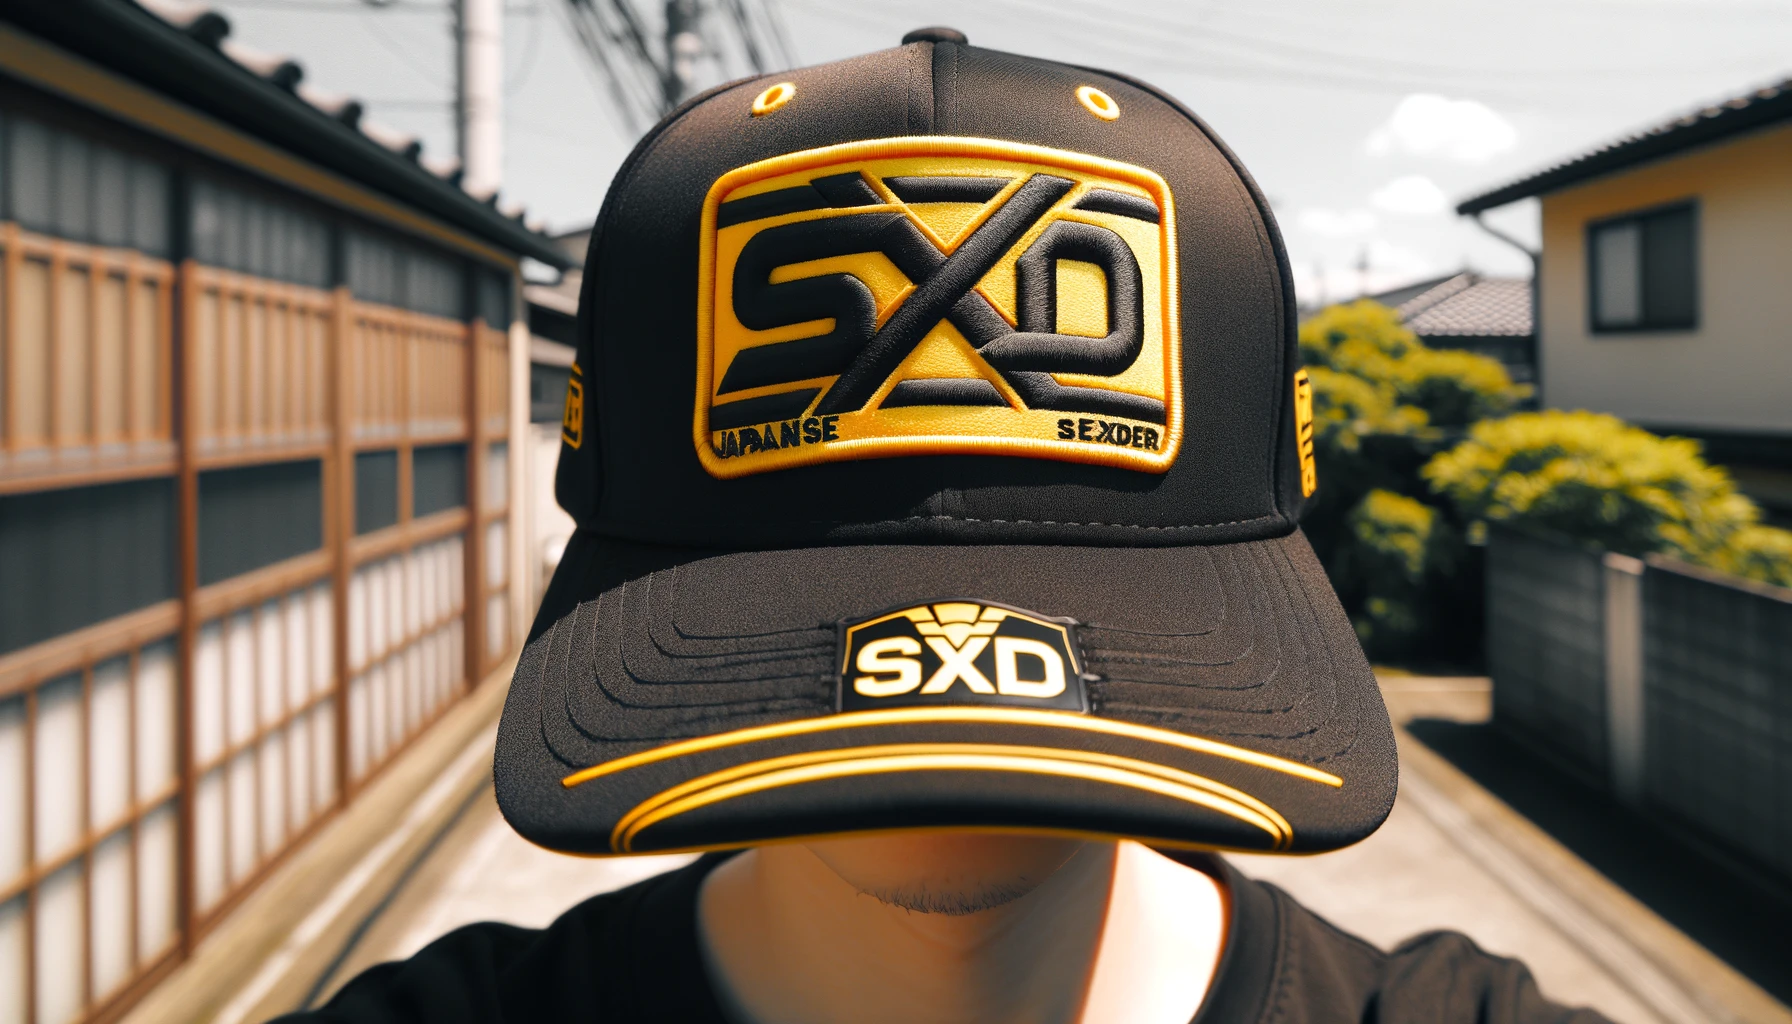 Japanese coordination with a cap featuring a large yellow and black logo in the center, SxD letters included, with the front logo blurred, missing, or not visible. Horizontal aspect ratio (16:9).